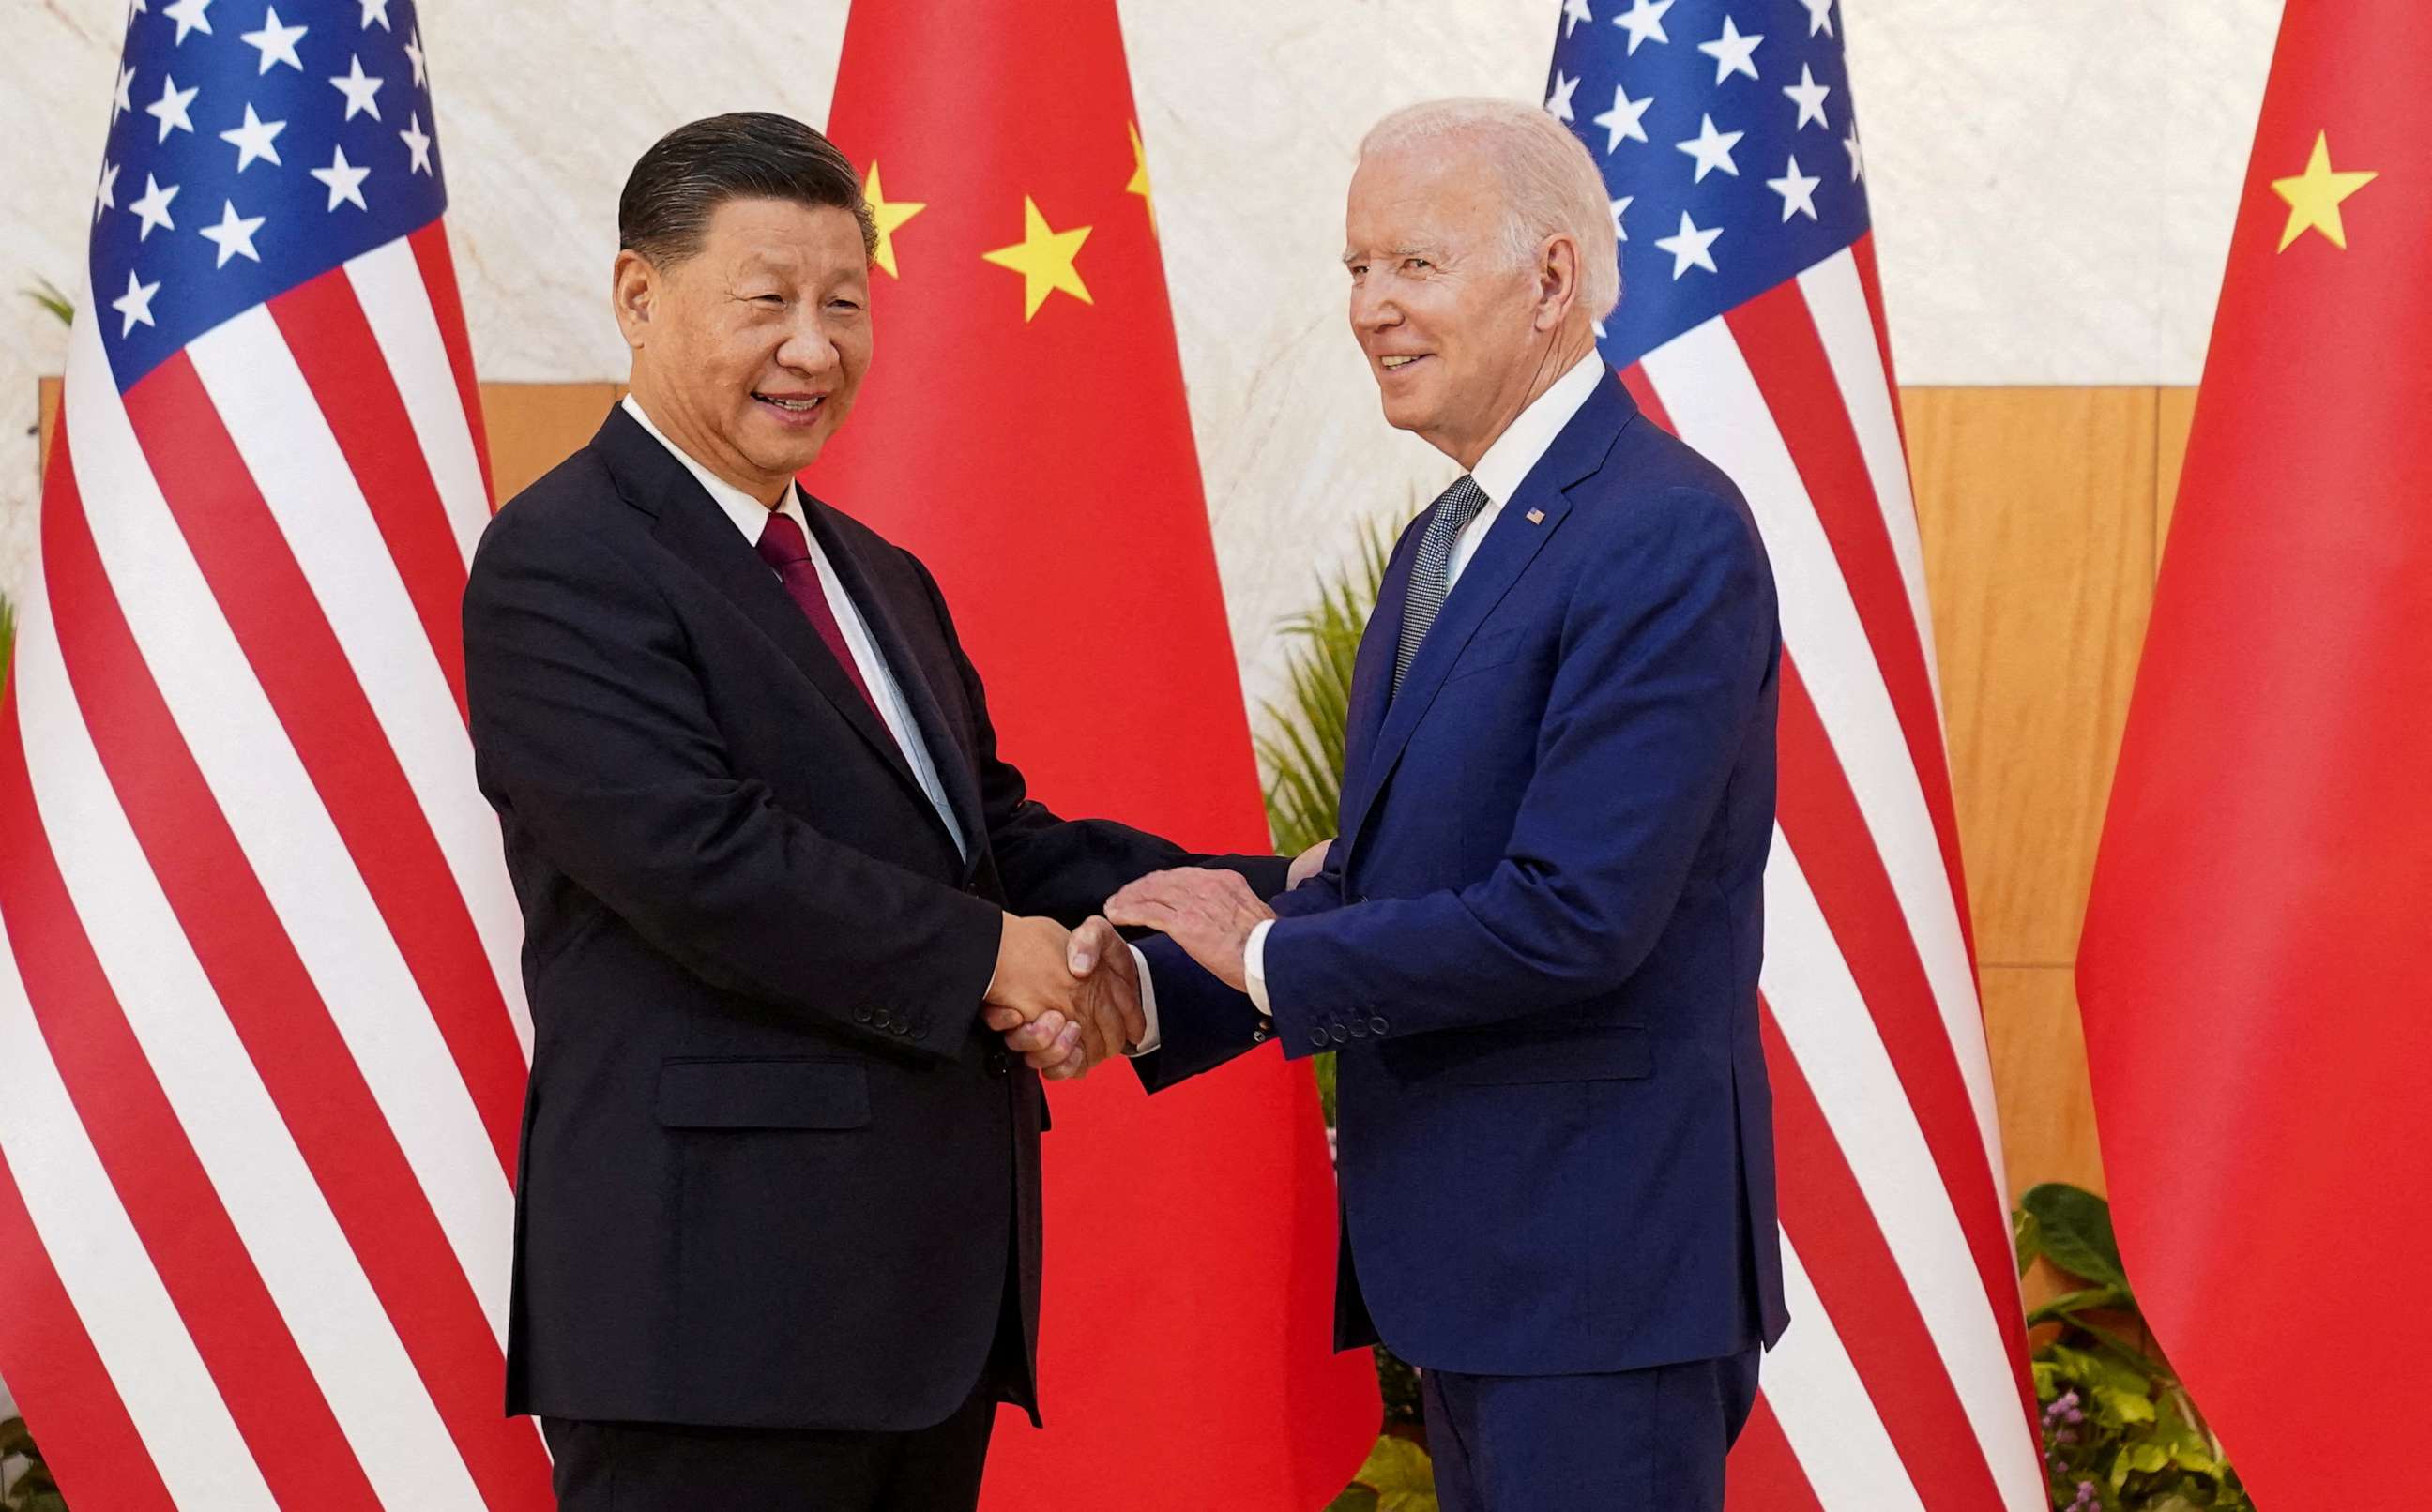 PHOTO: In this Nov. 14, 2022, file photo, President Joe Biden shakes hands with Chinese President Xi Jinping as they meet on the sidelines of the G20 leaders' summit in Bali, Indonesia.